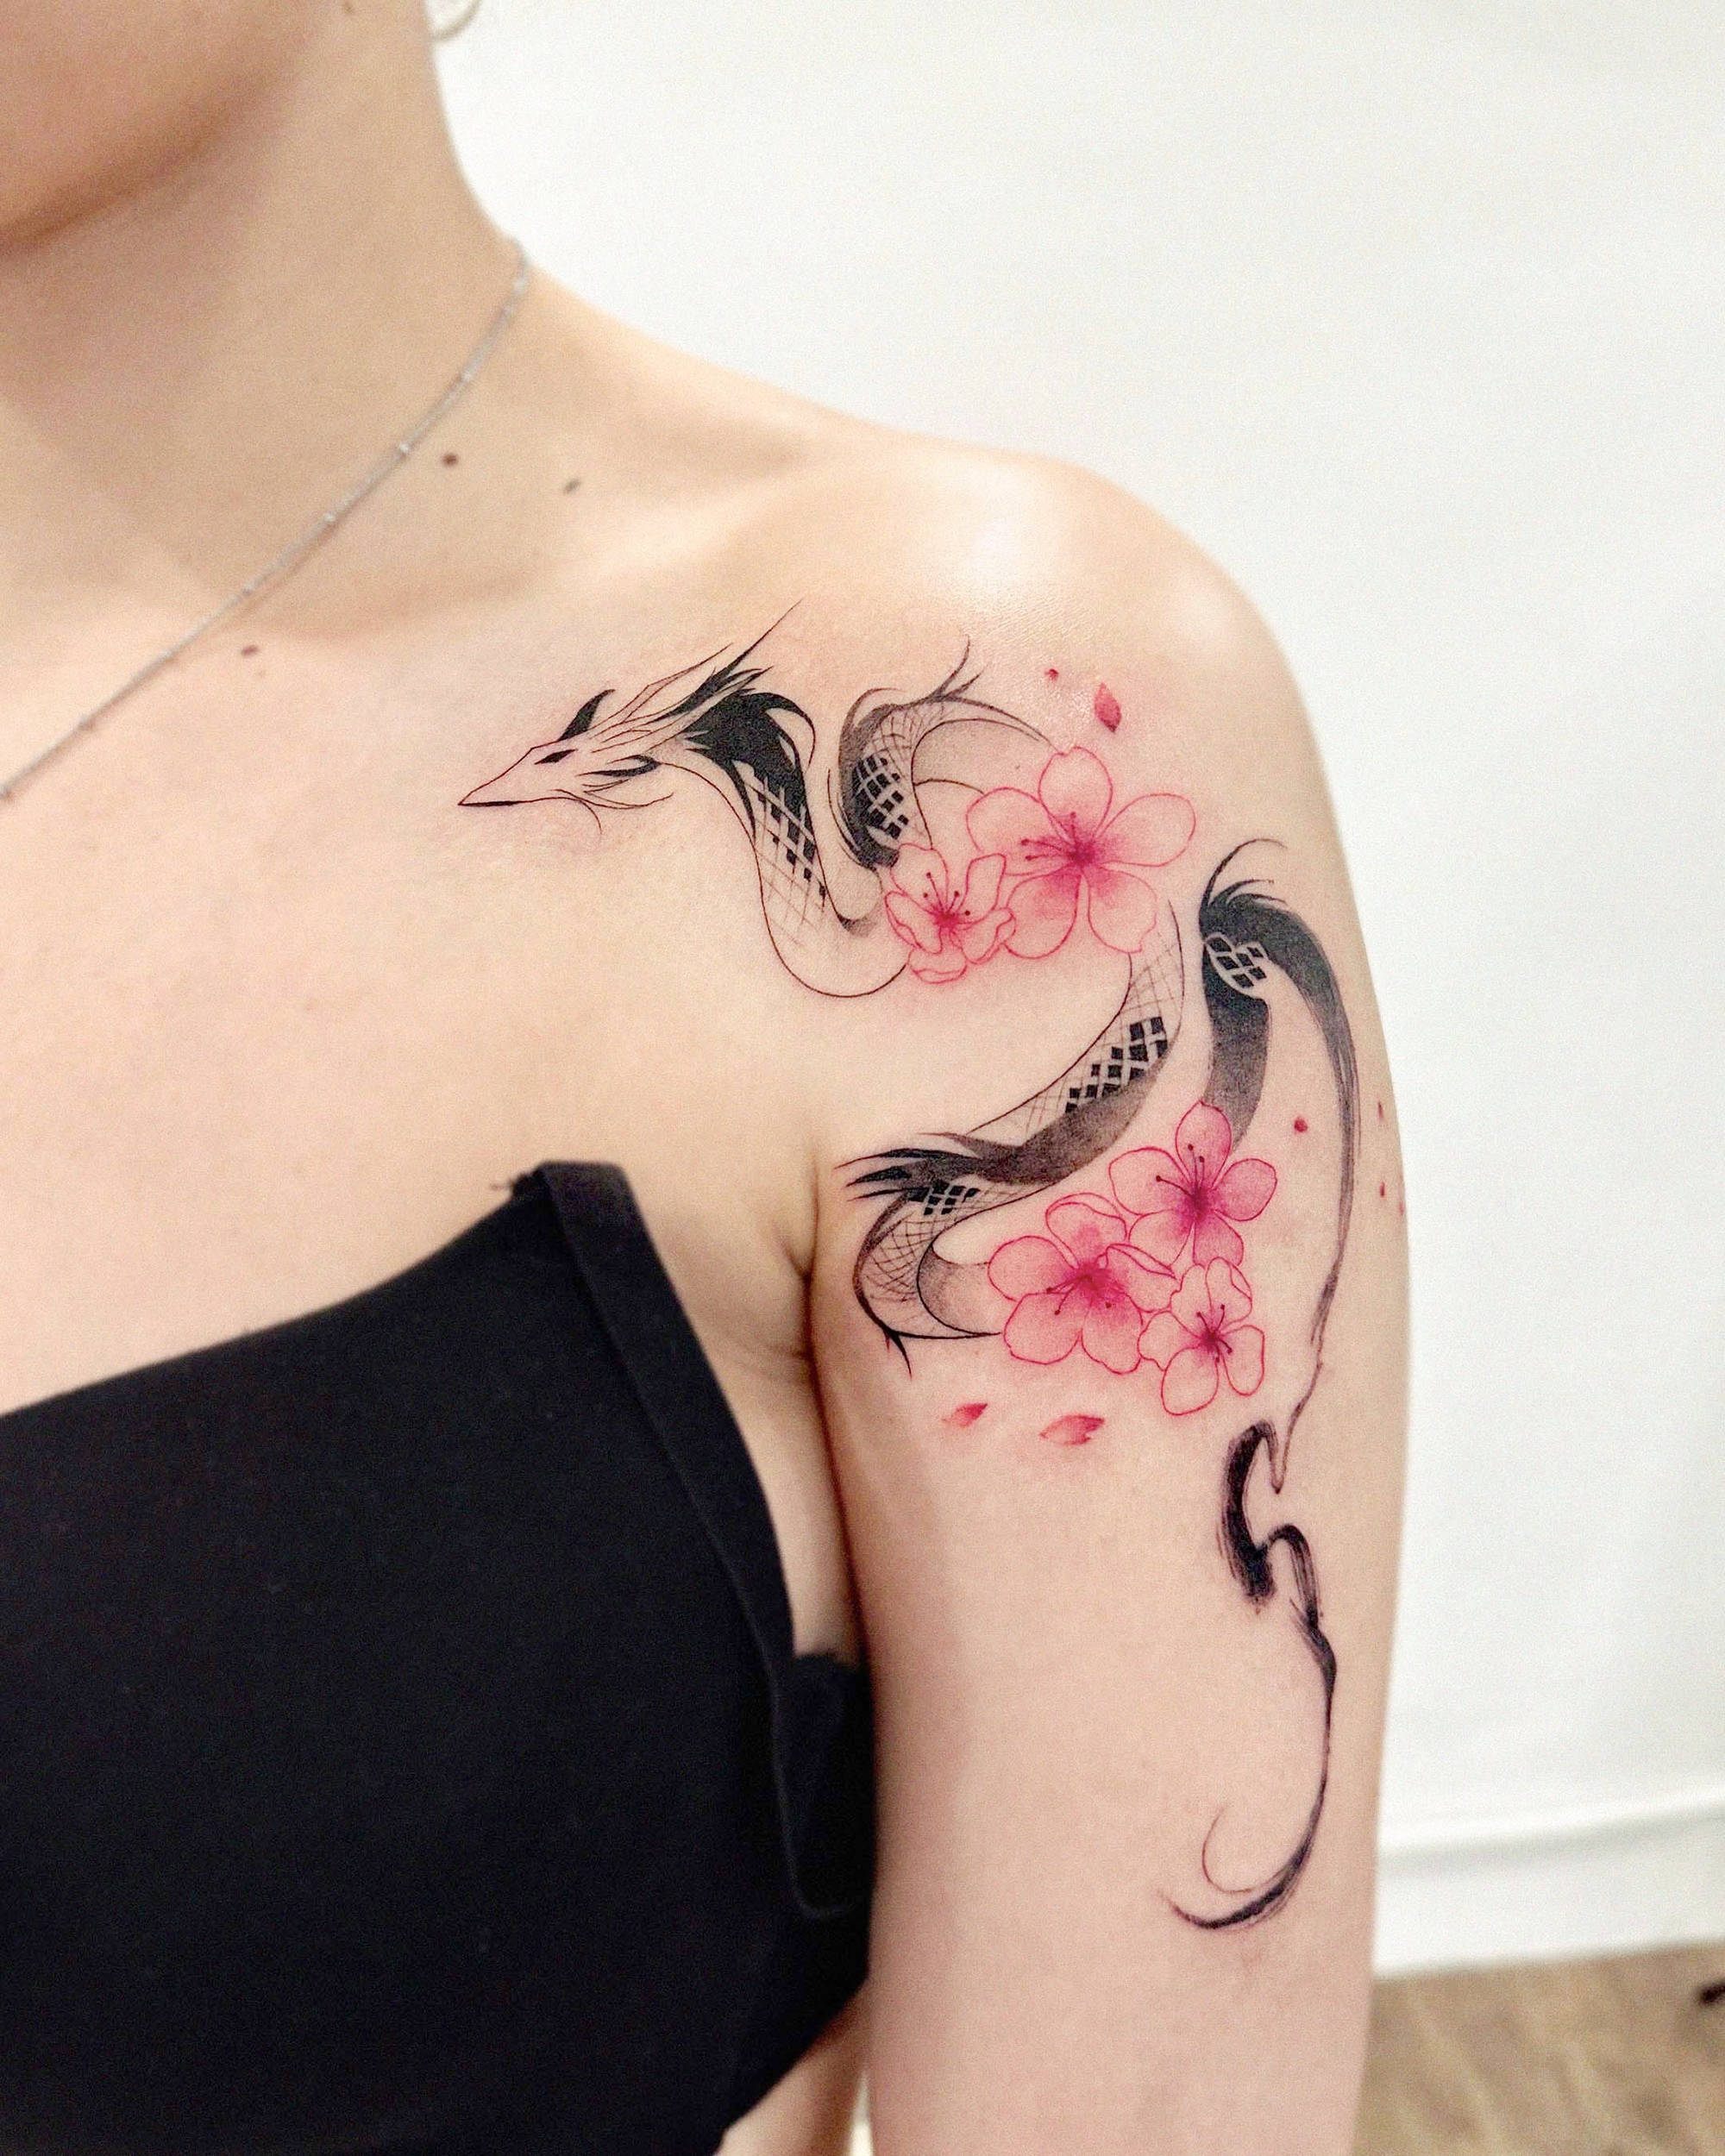 A painterly dragon with cherry blossoms, a tattoo by Ehyang black and magenta on arm